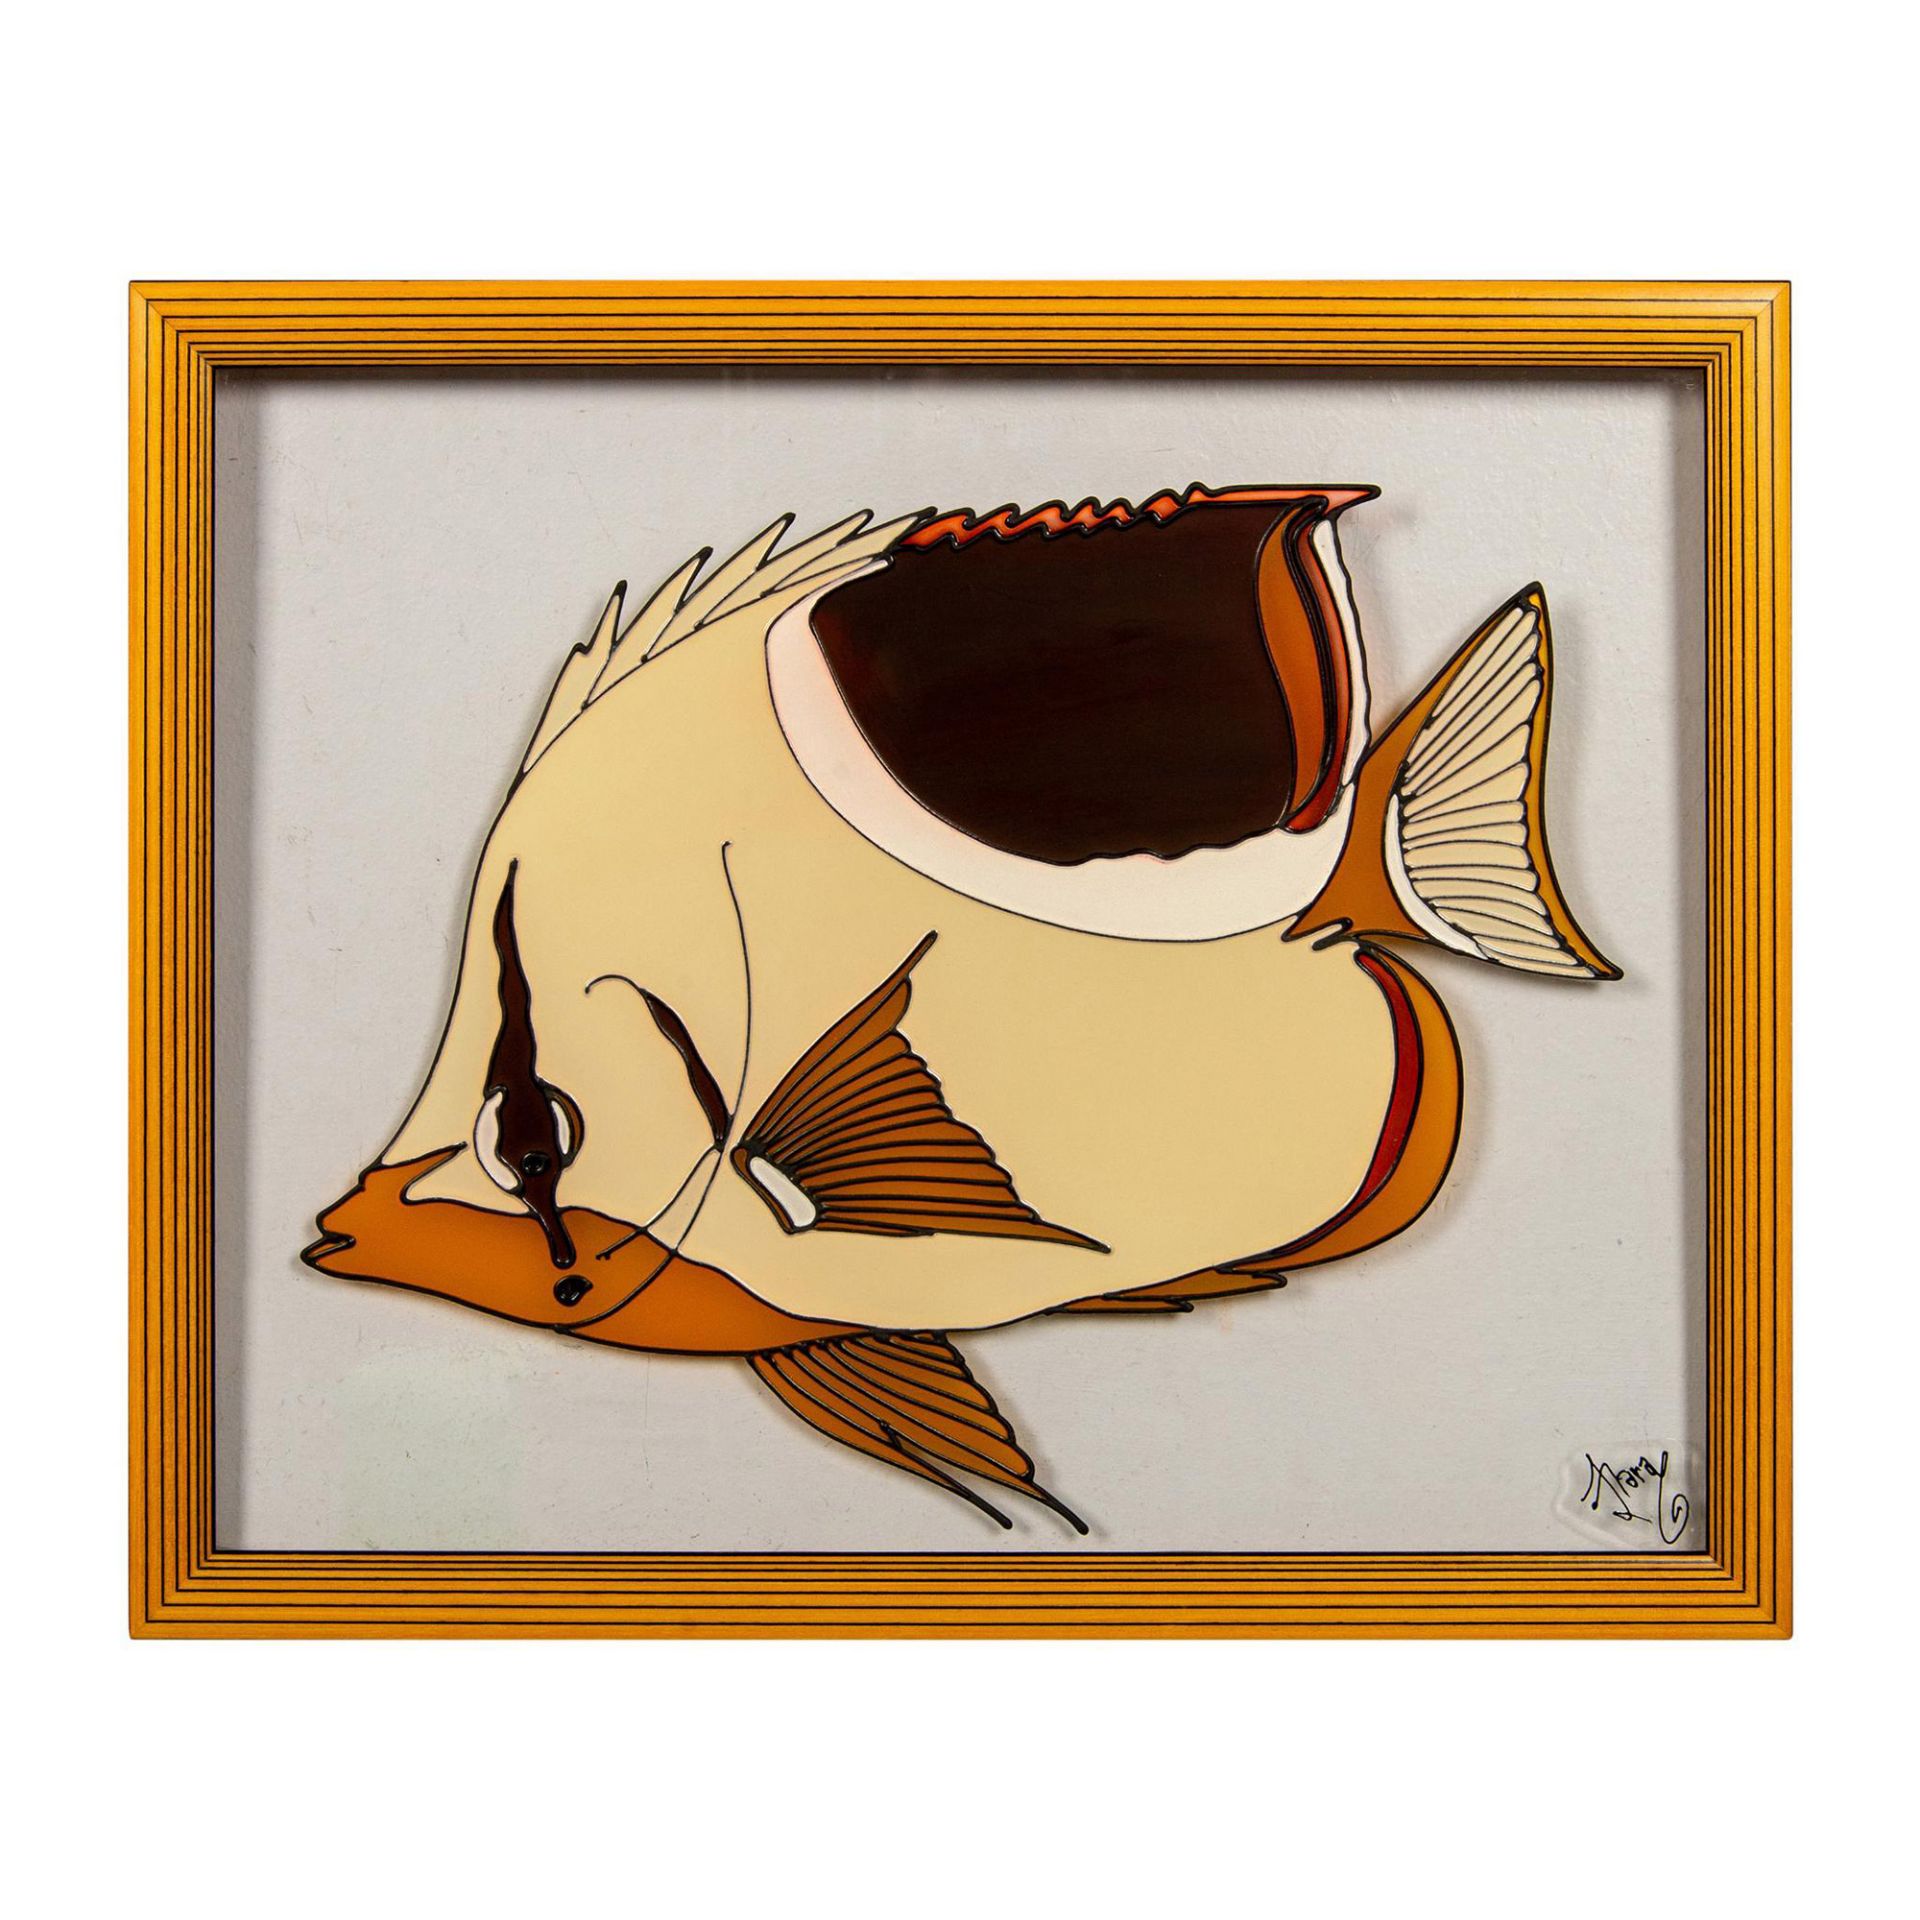 Framed Stained and Painted Glass Art, Tropical Fish, Signed - Image 4 of 6